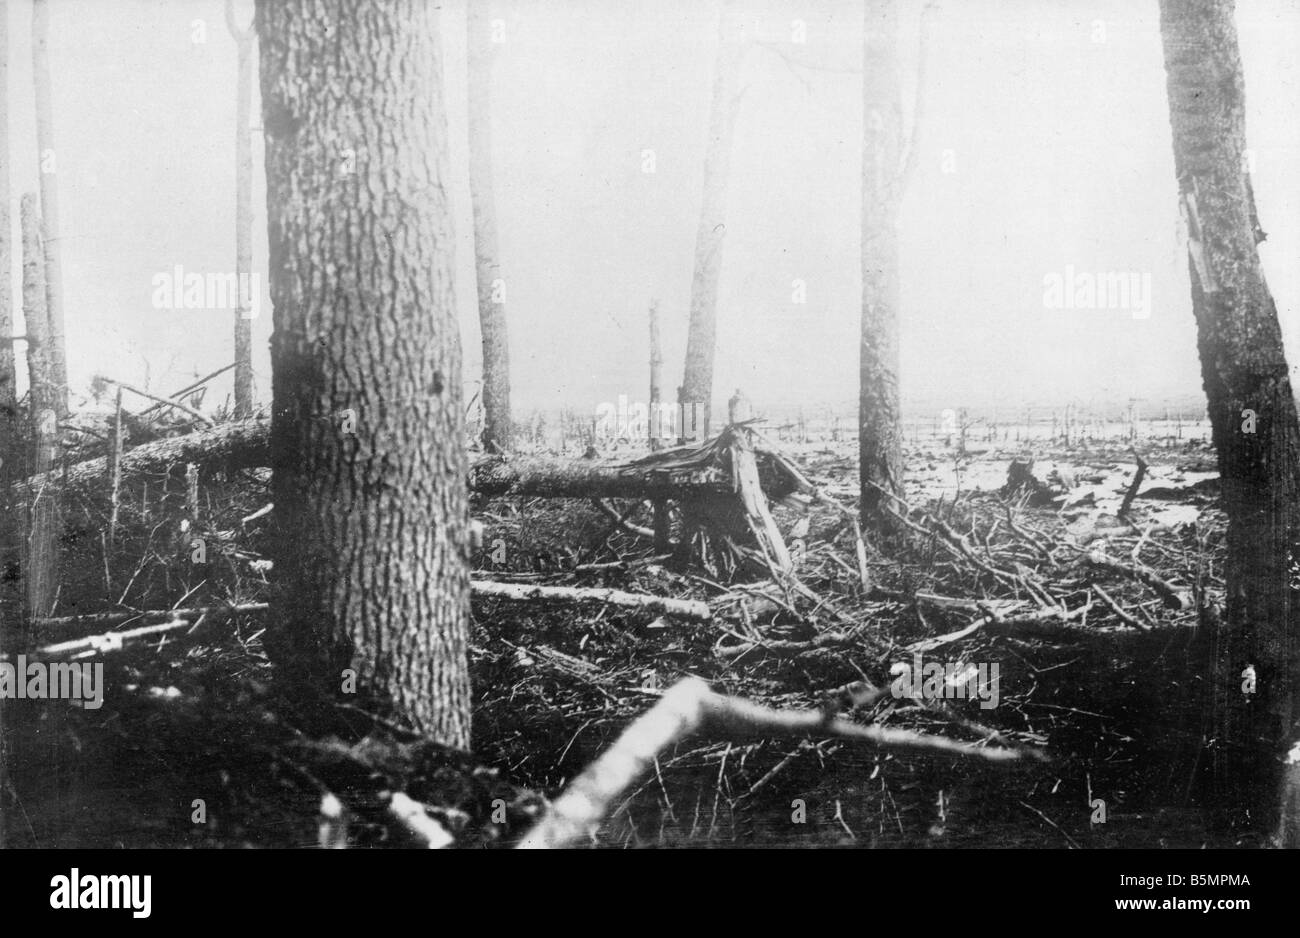 9 1916 3 18 A1 6 E Battle of Postawy 1916 Battlefield World War 1 Eastern Front Defeat of Russian troops after an offen sive on Stock Photo